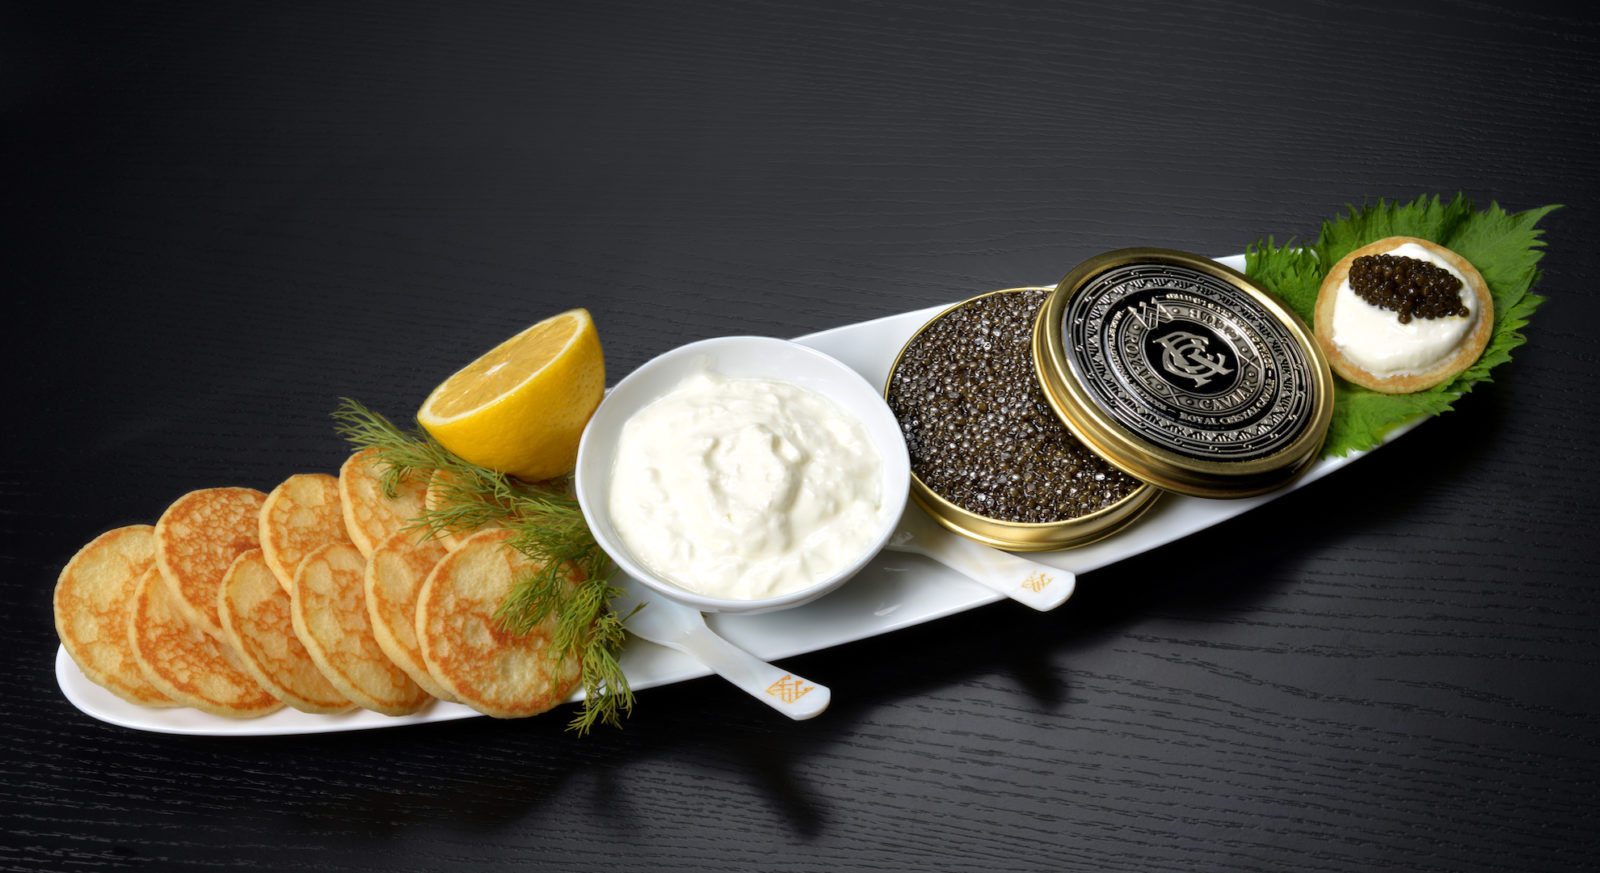 Want to indulge on caviar without leaving the house? Here’s how.